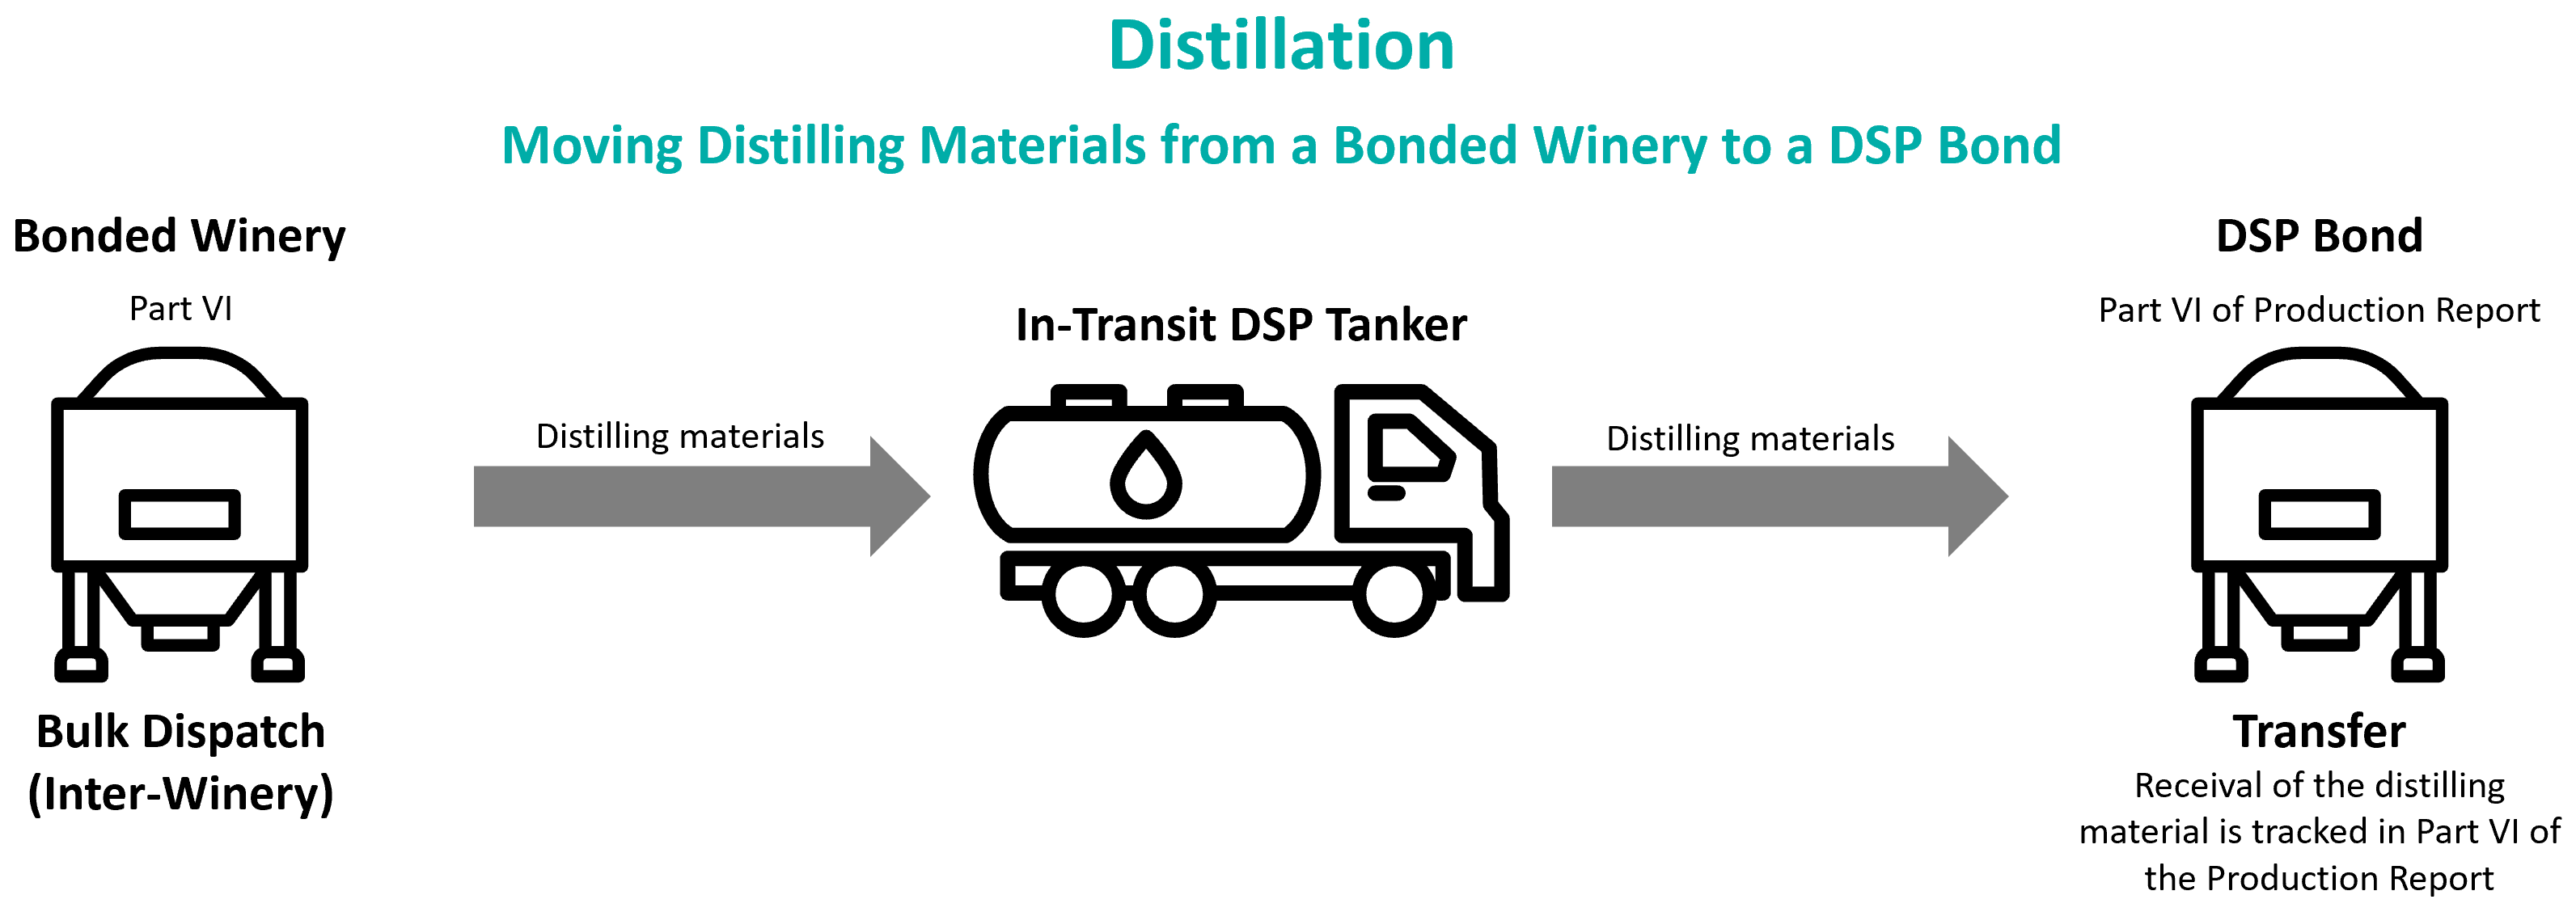 Diagram - Distillation - Bonded Winery to DSP Bond 20231109.png